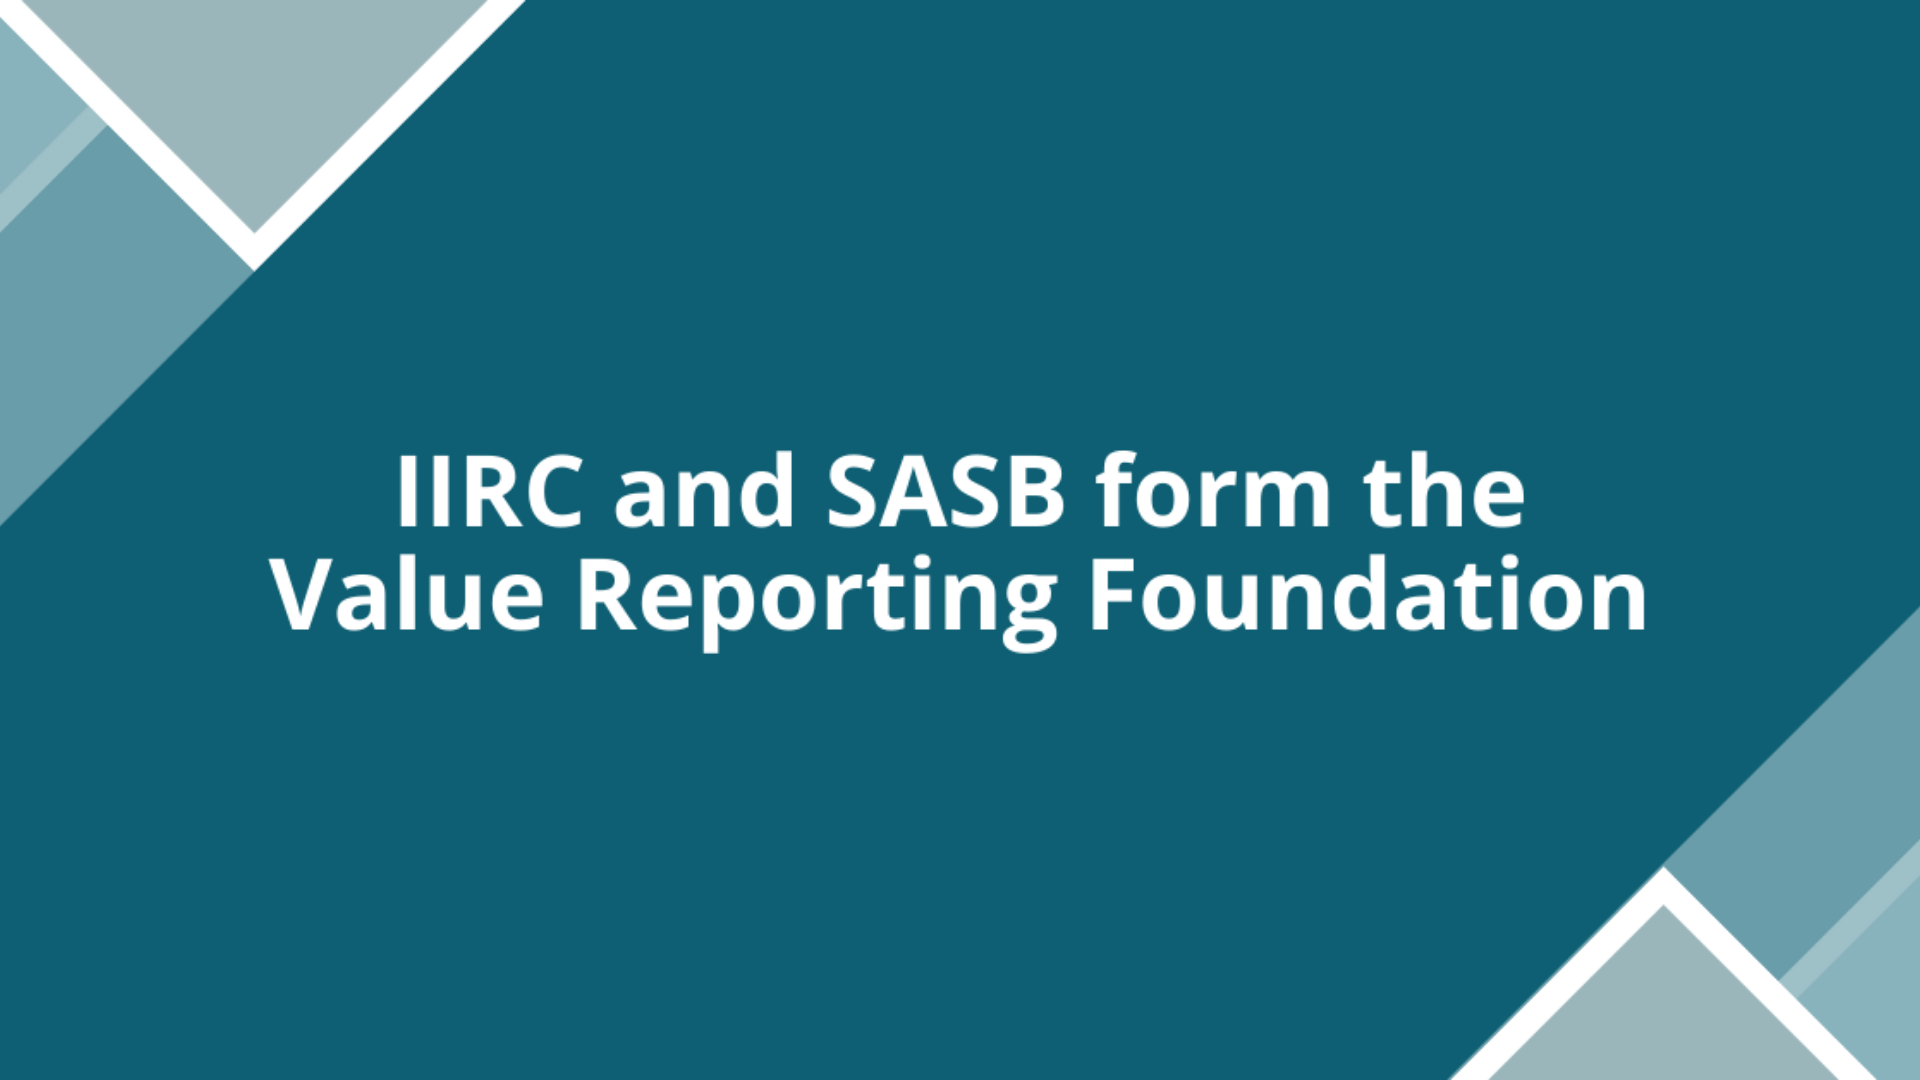 IIRC and SASB form the Value Reporting Foundation